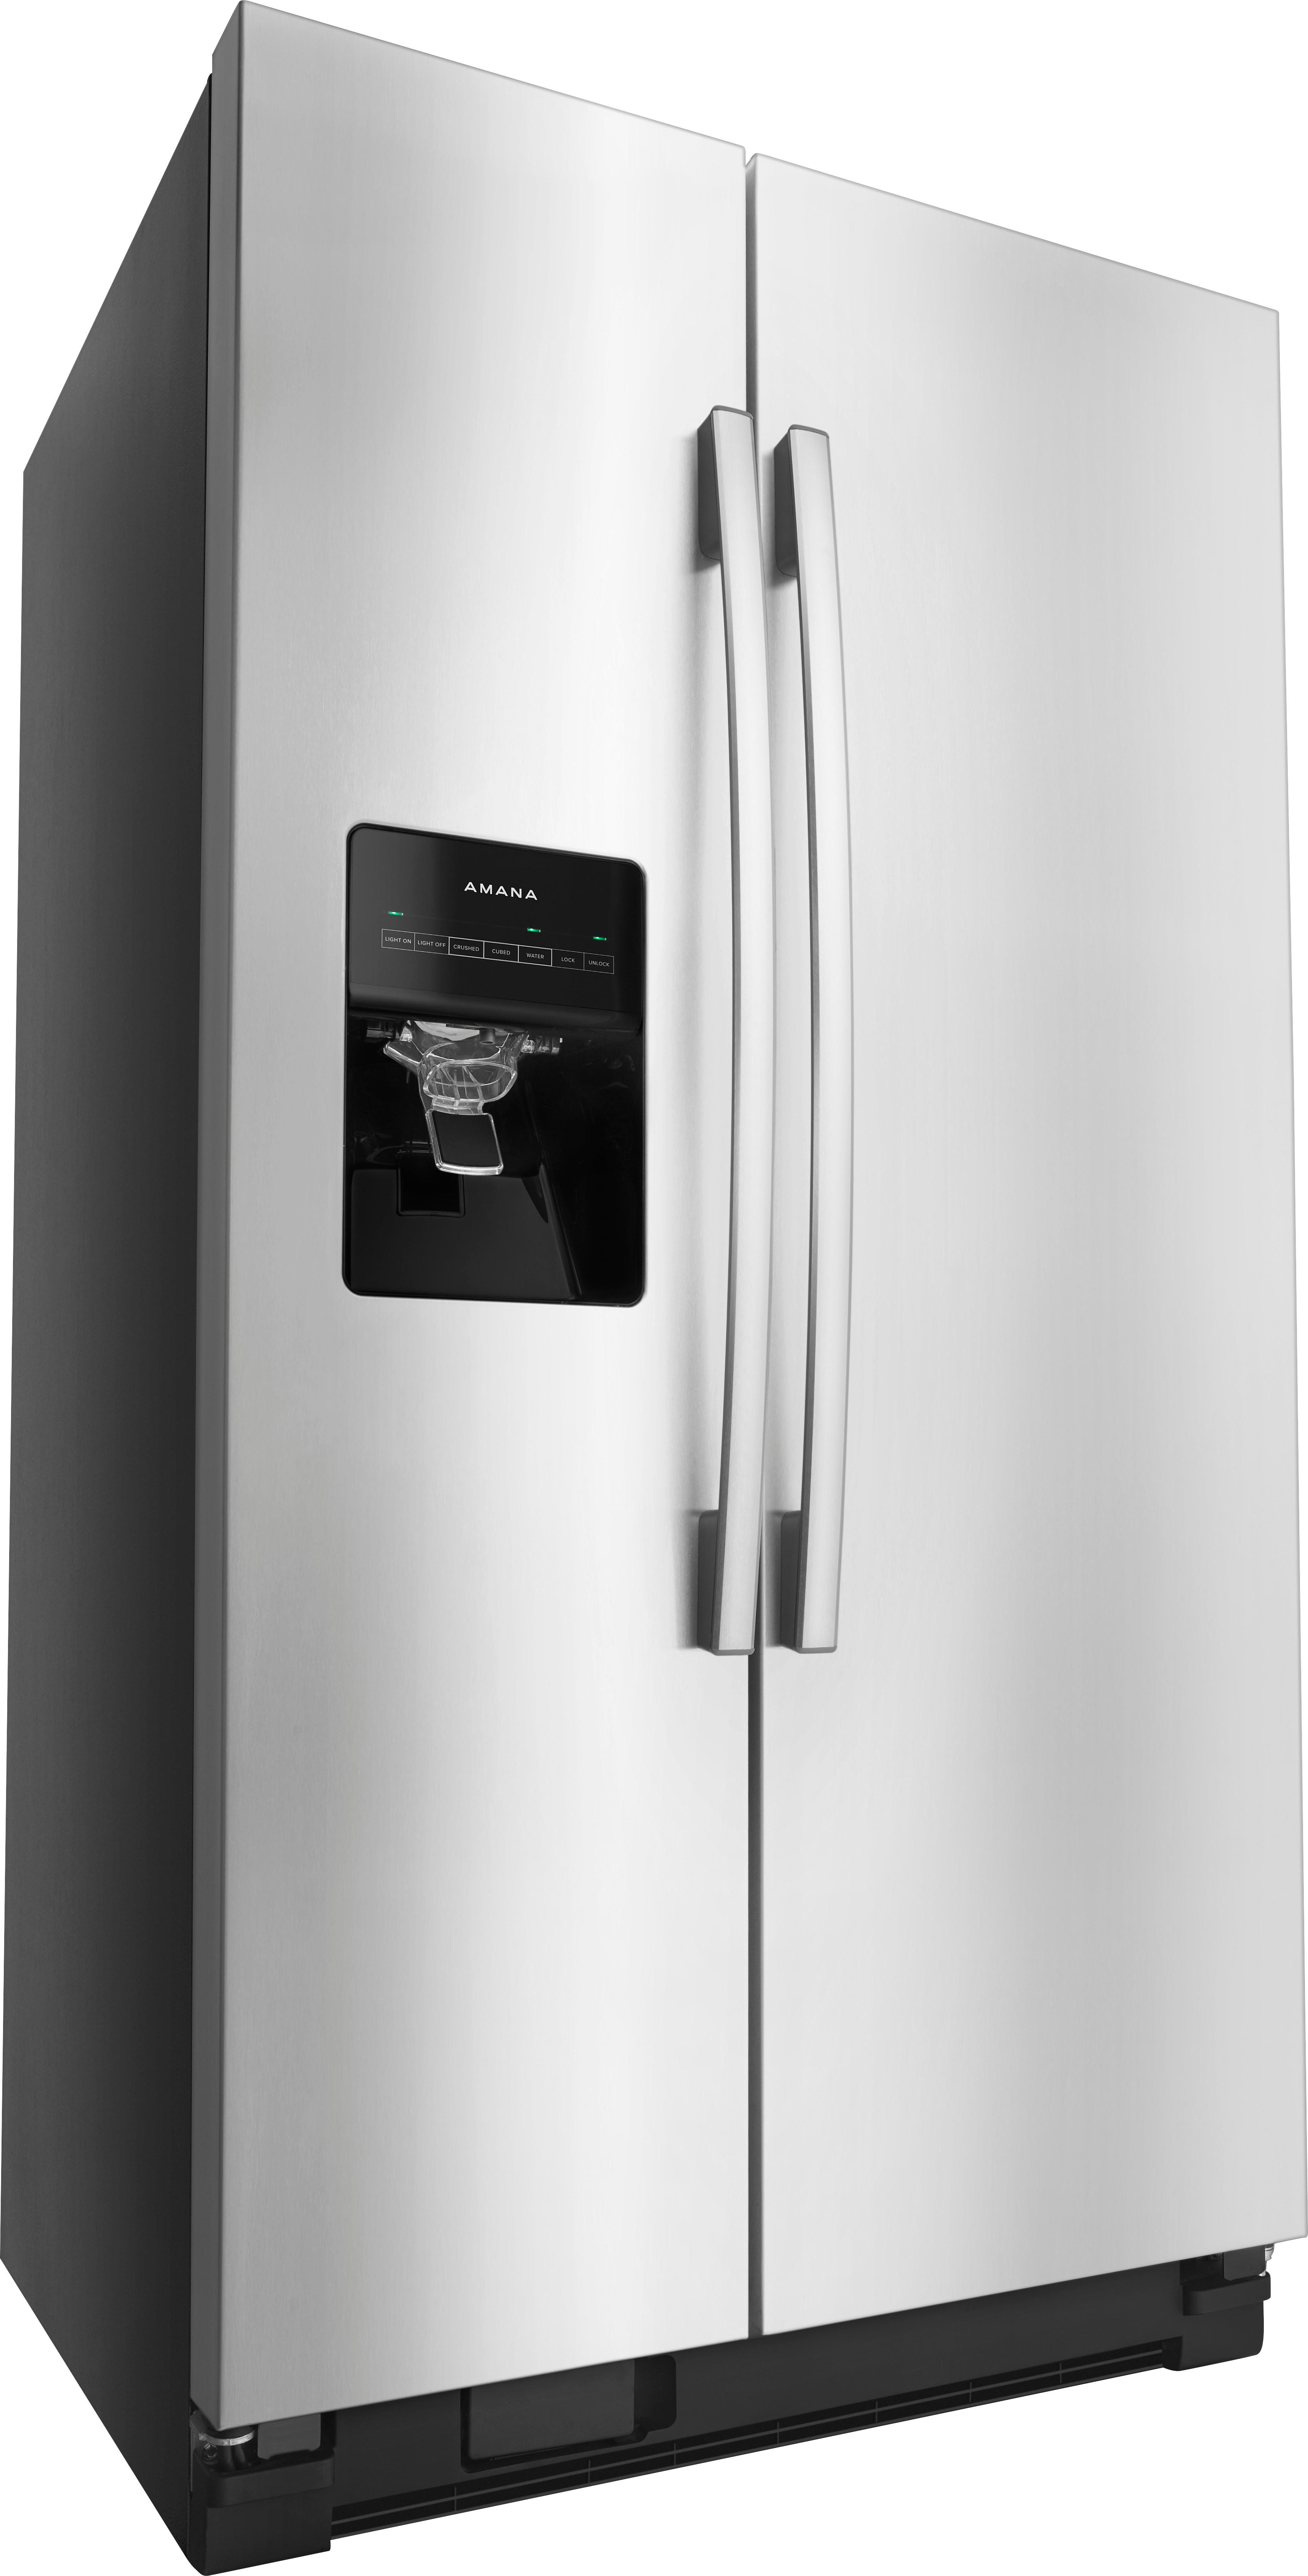 Questions and Answers: Amana 24.5 Cu. Ft. Side-by-Side Refrigerator ...